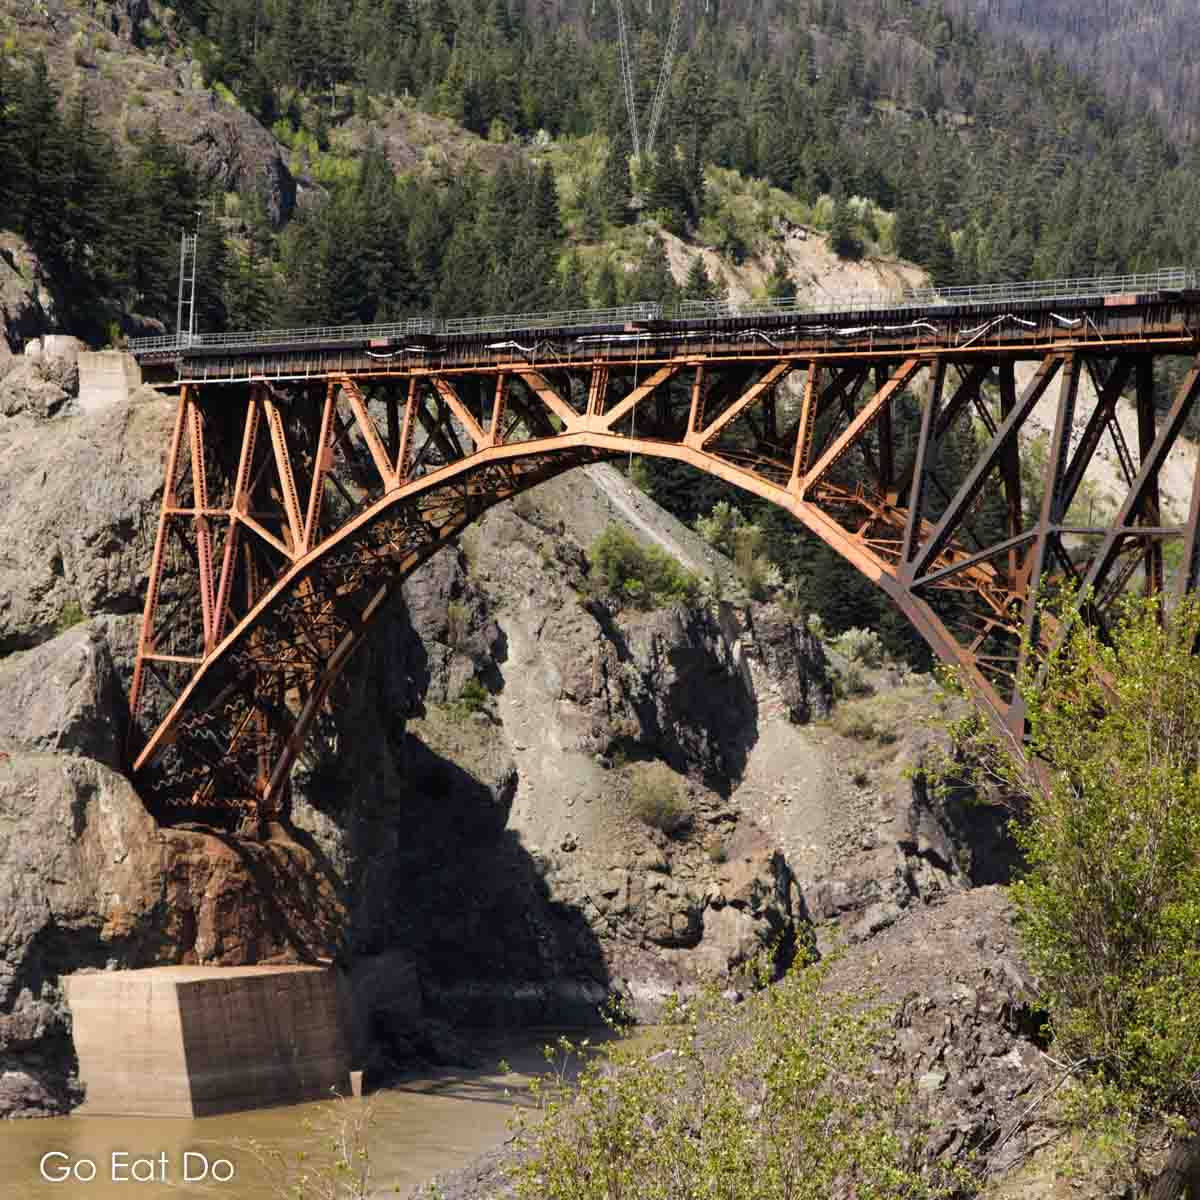 The Cisco Crossing, the arched bridge over the Fraser River in British Columbia, where the Canadian National Railway and Canadian Pacific Railway come together.